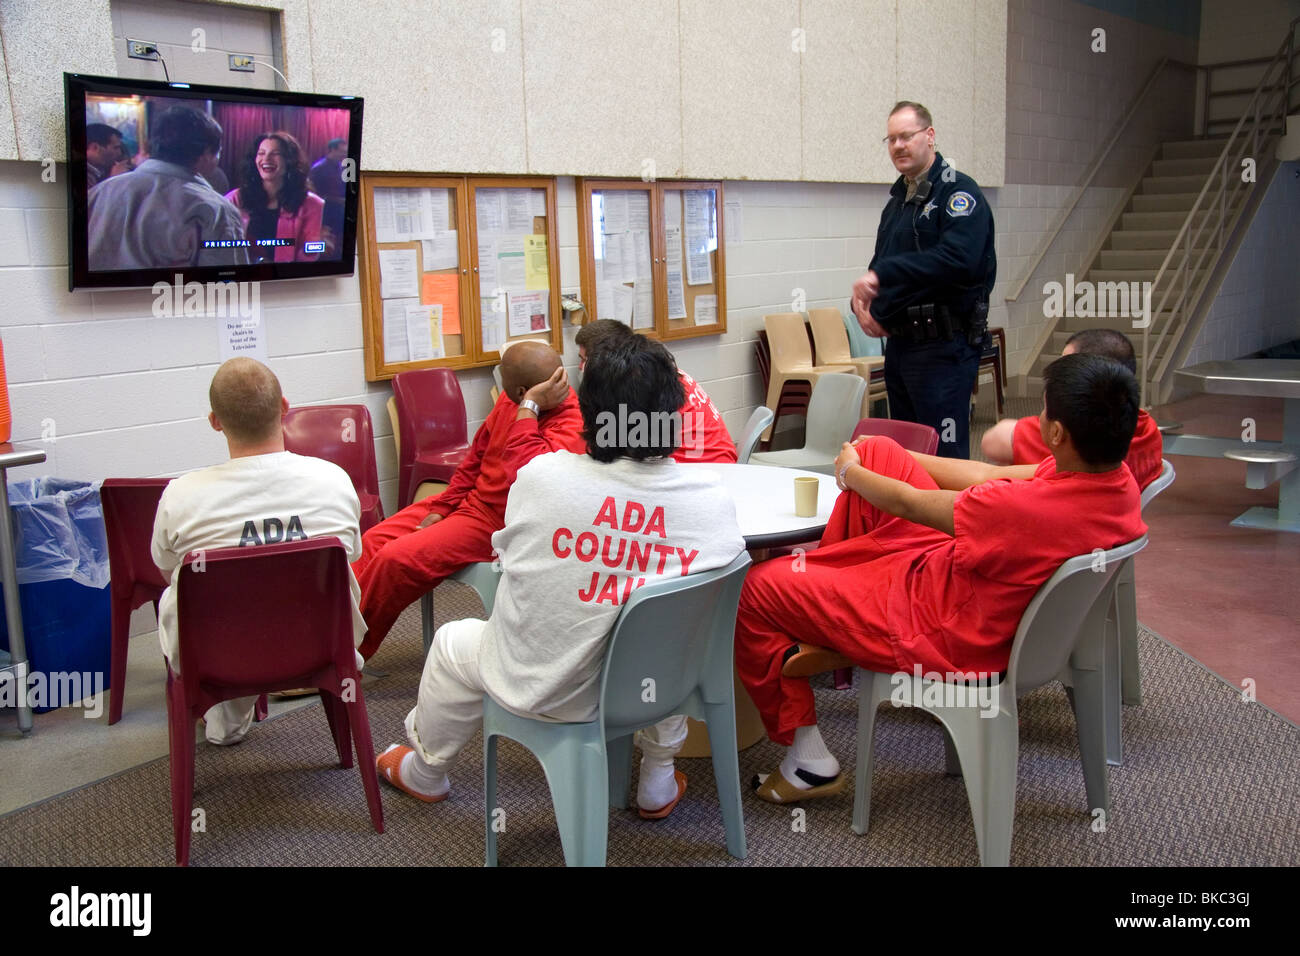 Inmates watch television in the recreational area of a county jail. Stock Photo